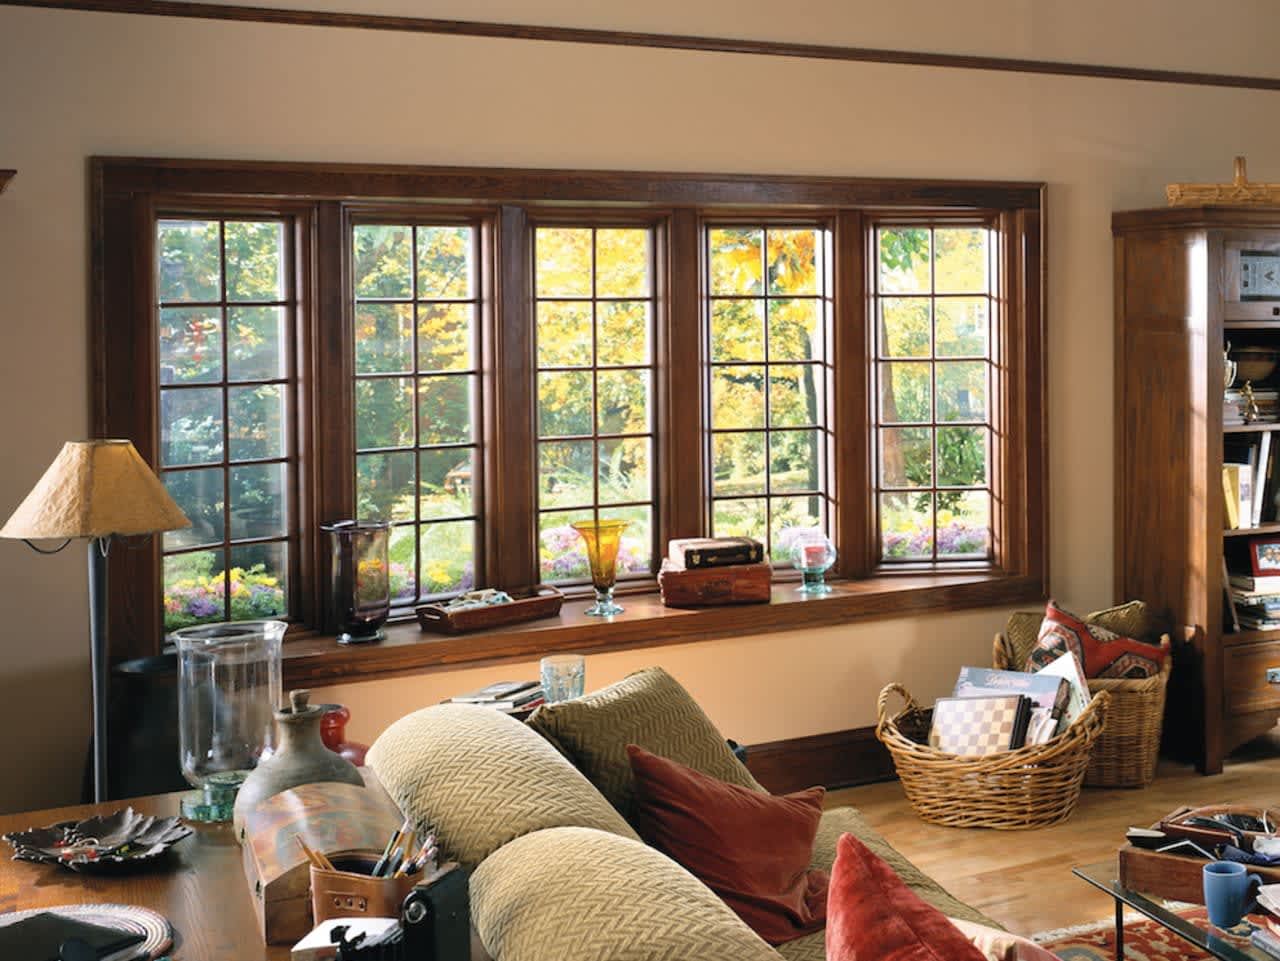 This fall, see the season's colors better than ever before with new windows from Renewal by Andersen.